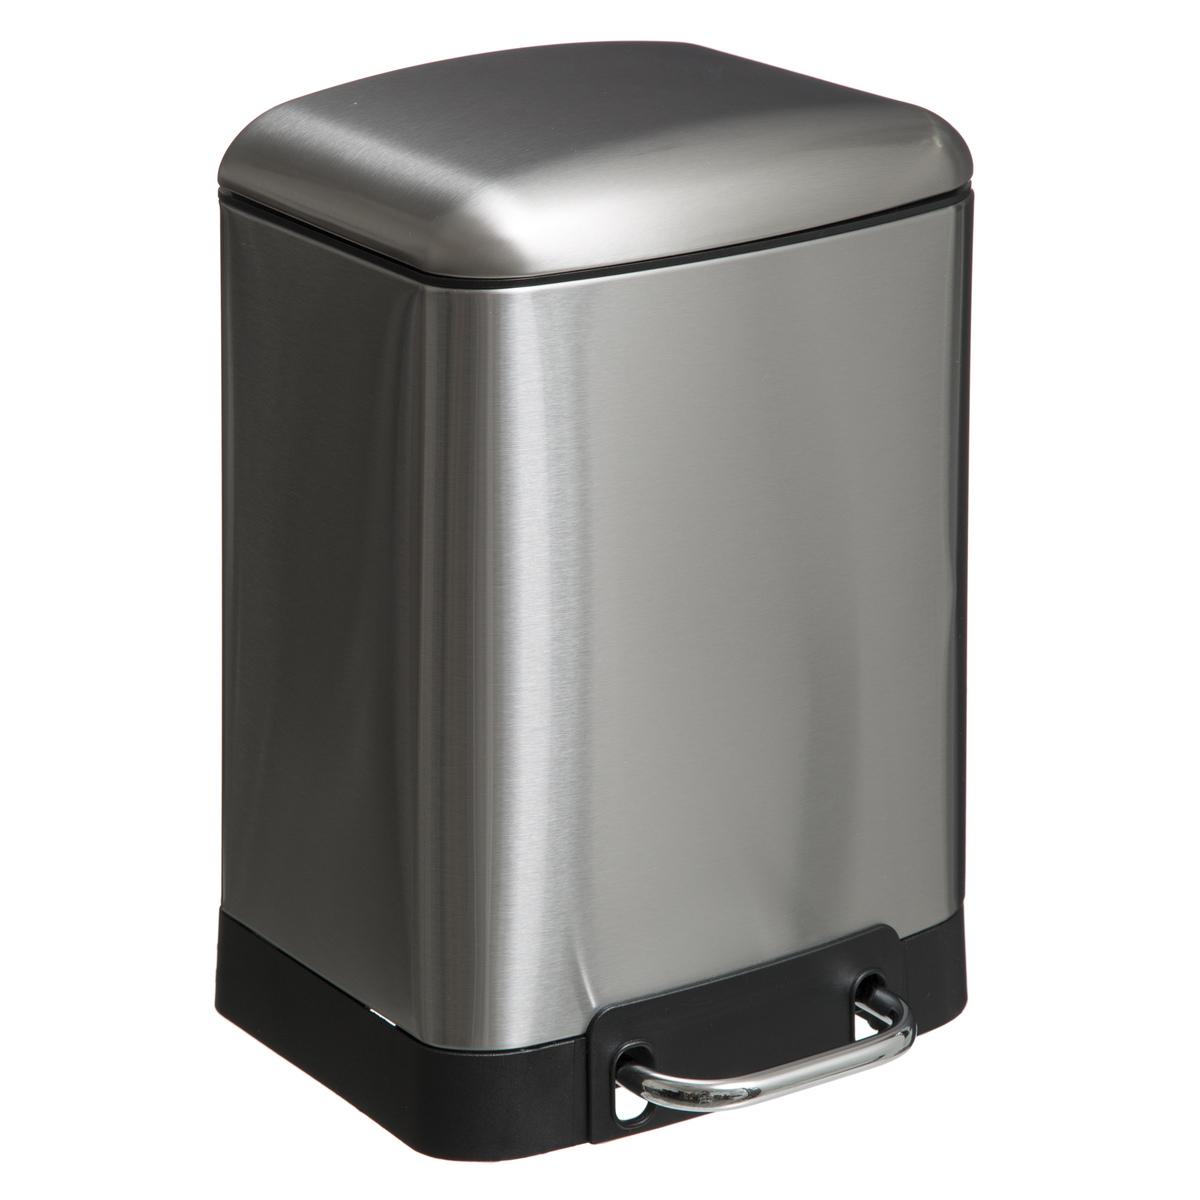 Pedal garbage can 6L Ariane stainless steel ture for Professionals -  Decoration Brands